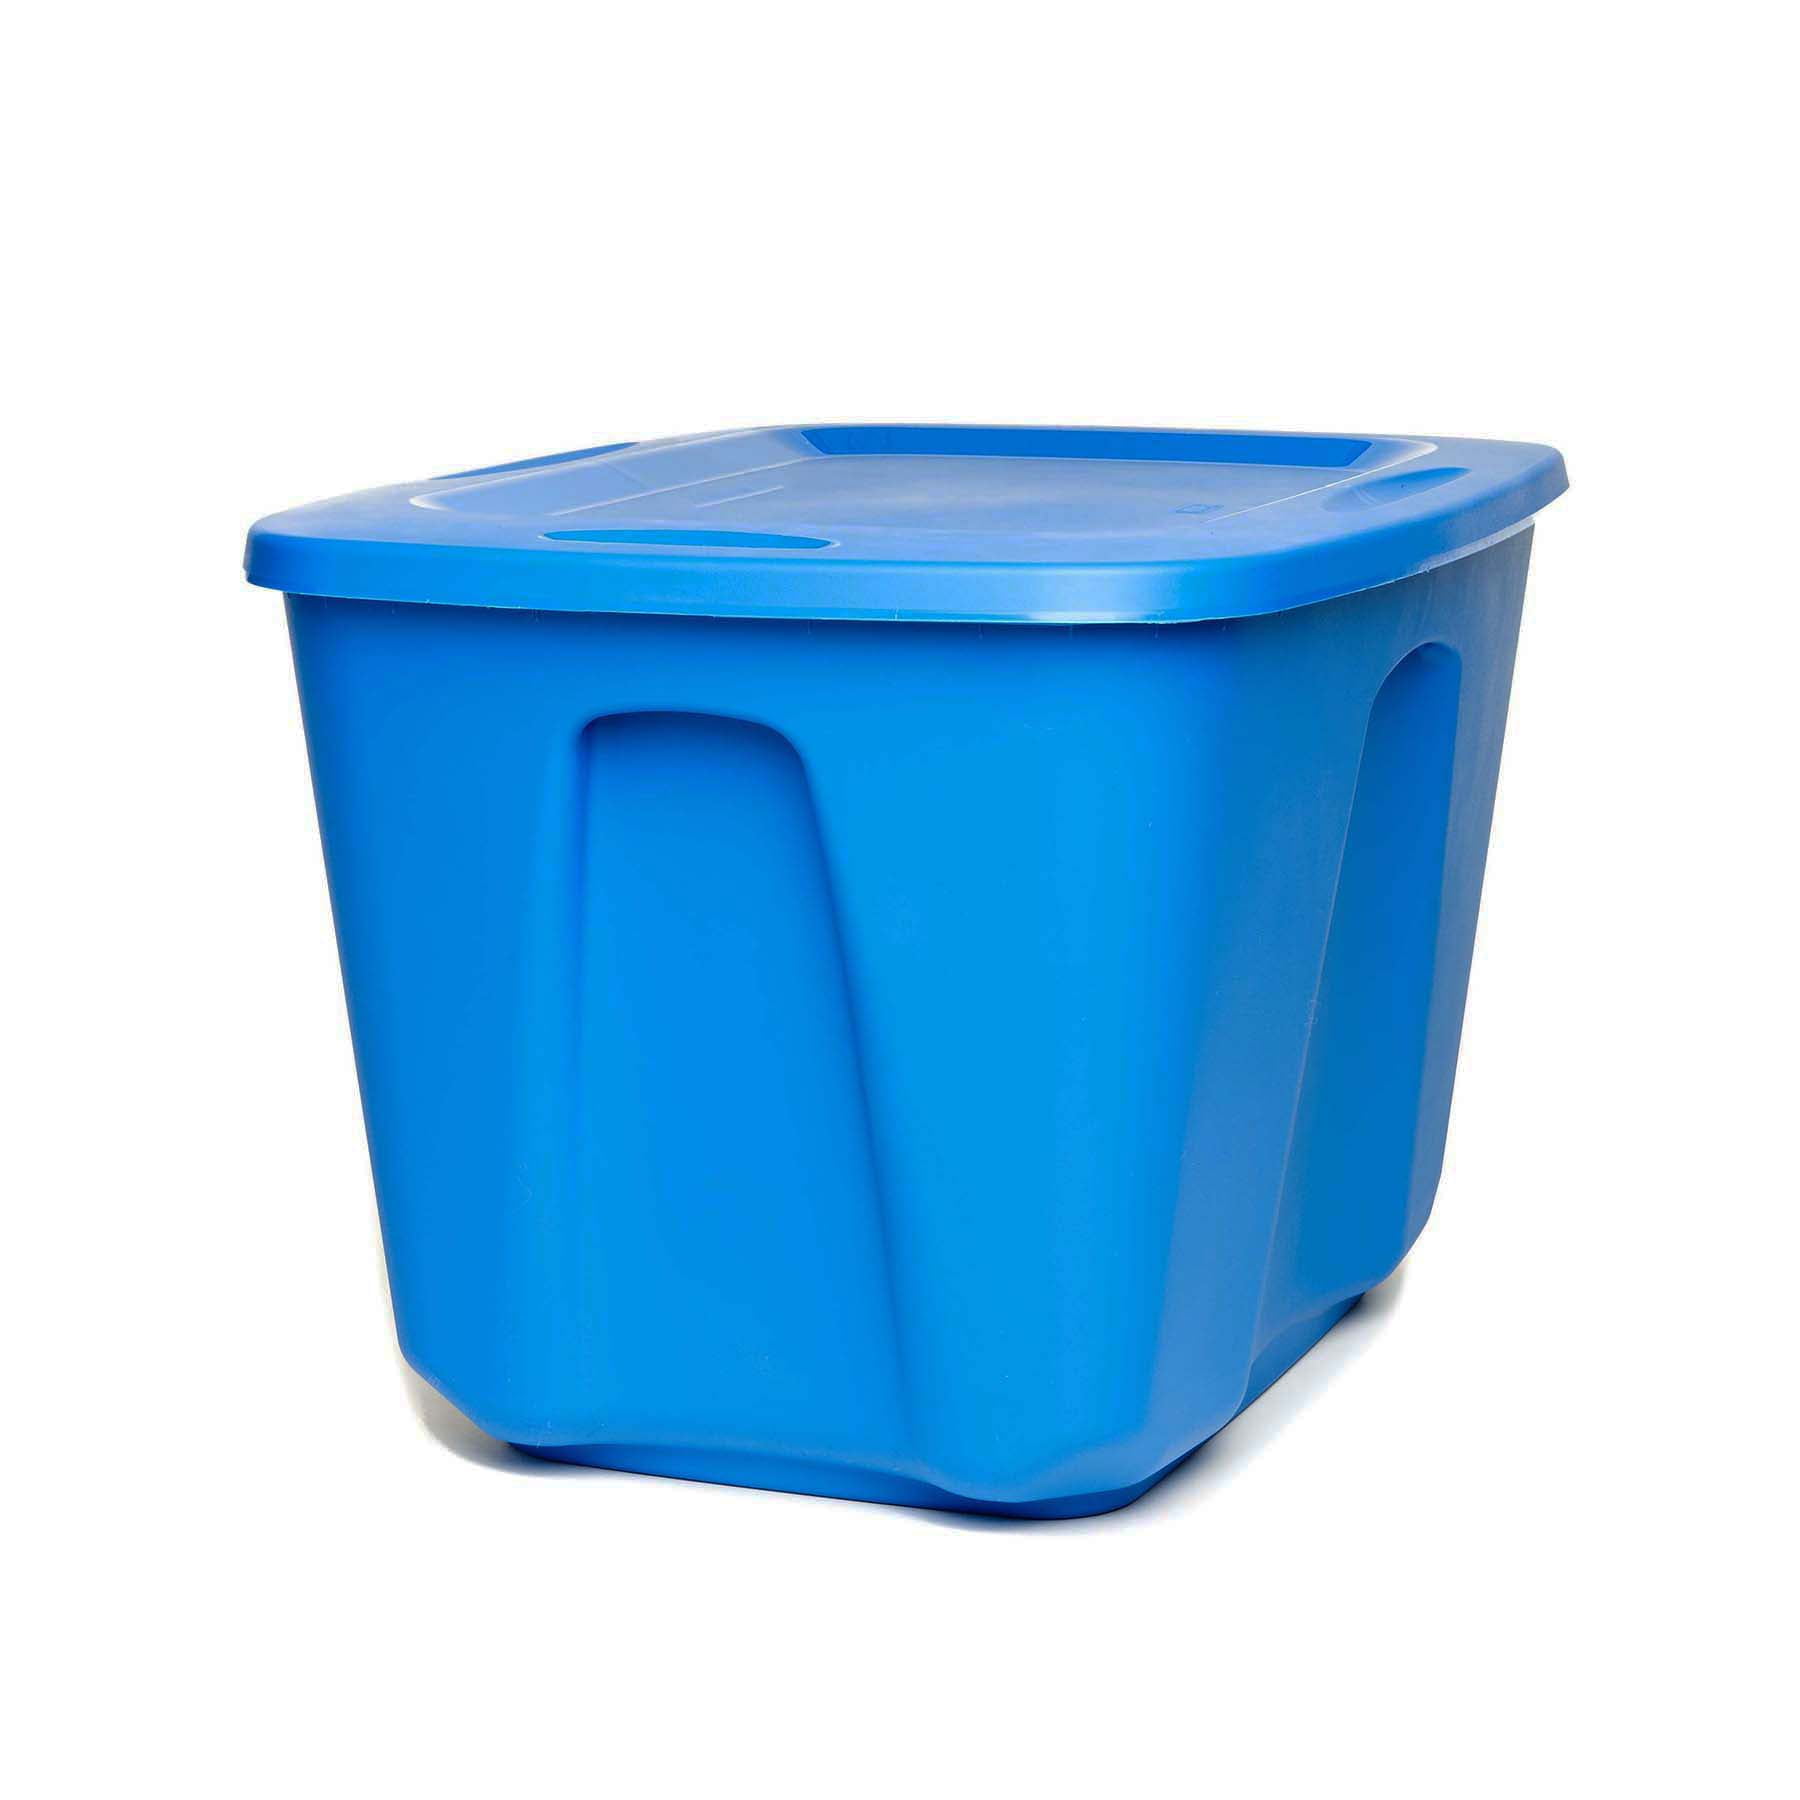 HOMZ 18 Gallon Medium Standard Stackable Plastic Storage Container Bin with  Secure Snap Lid for Home Organization, Blue, 4 Pack